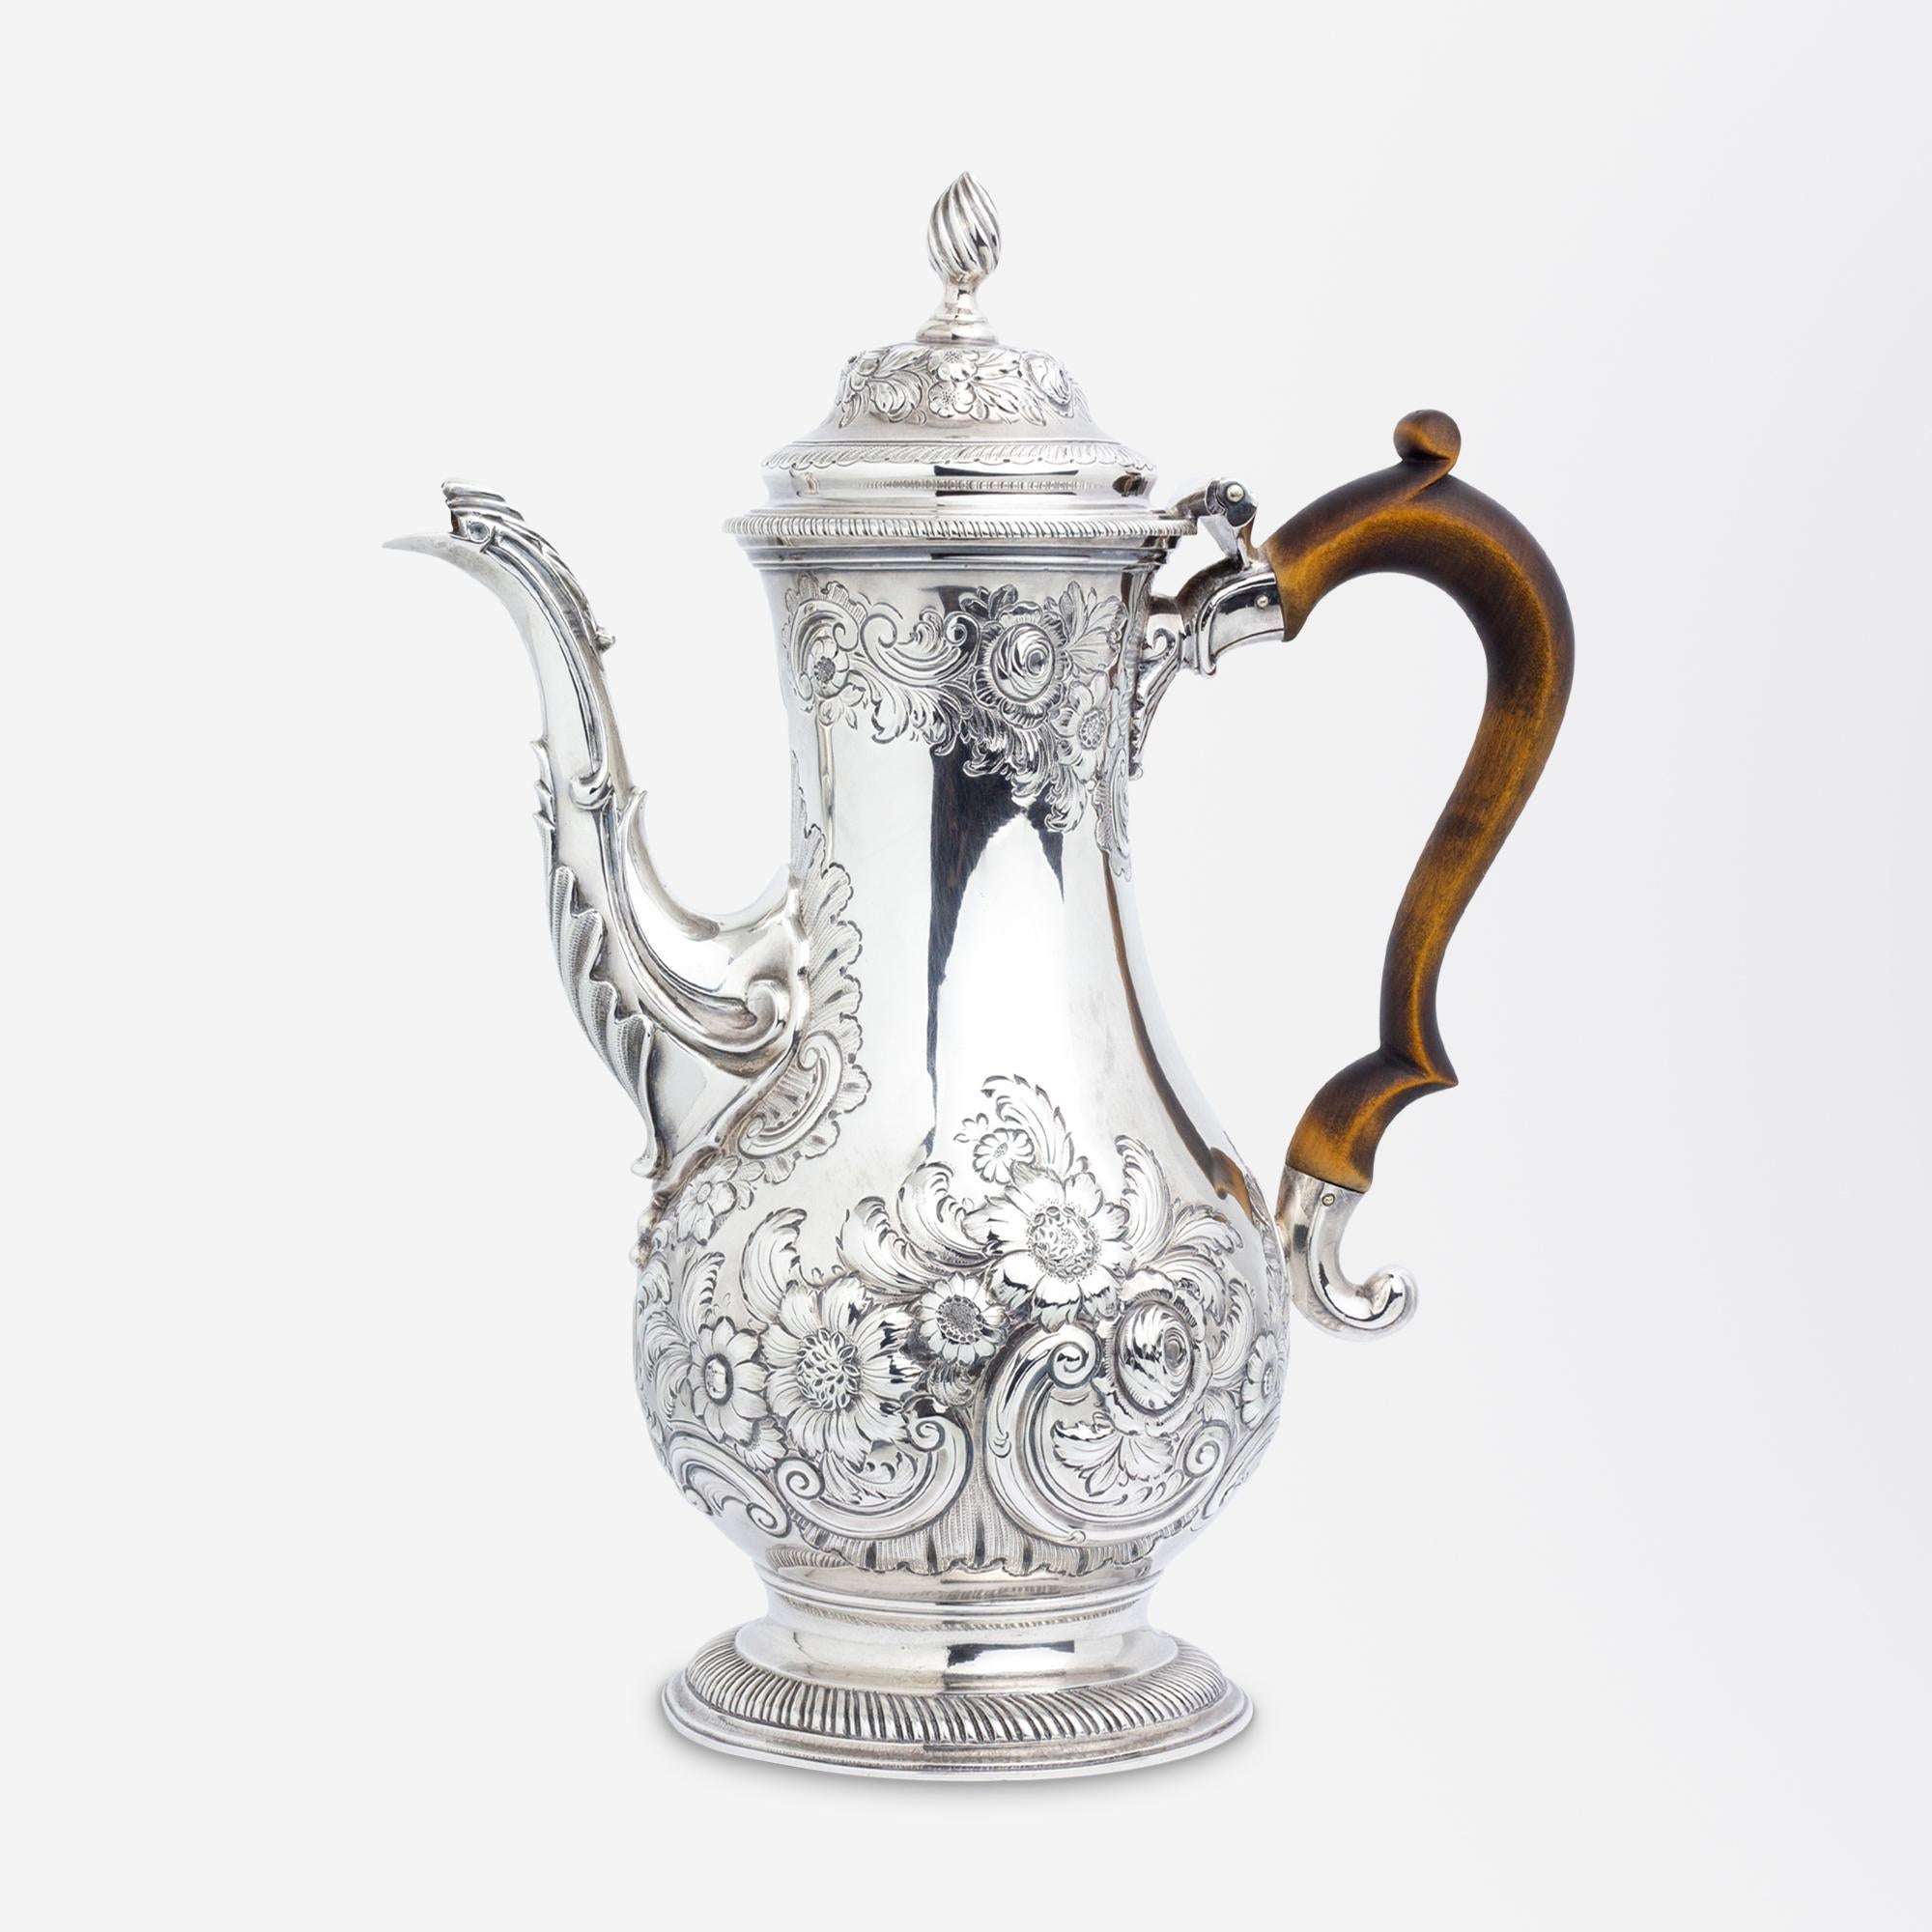 A George III sterling silver coffee pot with a wooden handle likely by Charles Wright of London. The pot features what could be described as Rococo period repousse swags and floral sprays which were often seen in art and design during the mid 18th